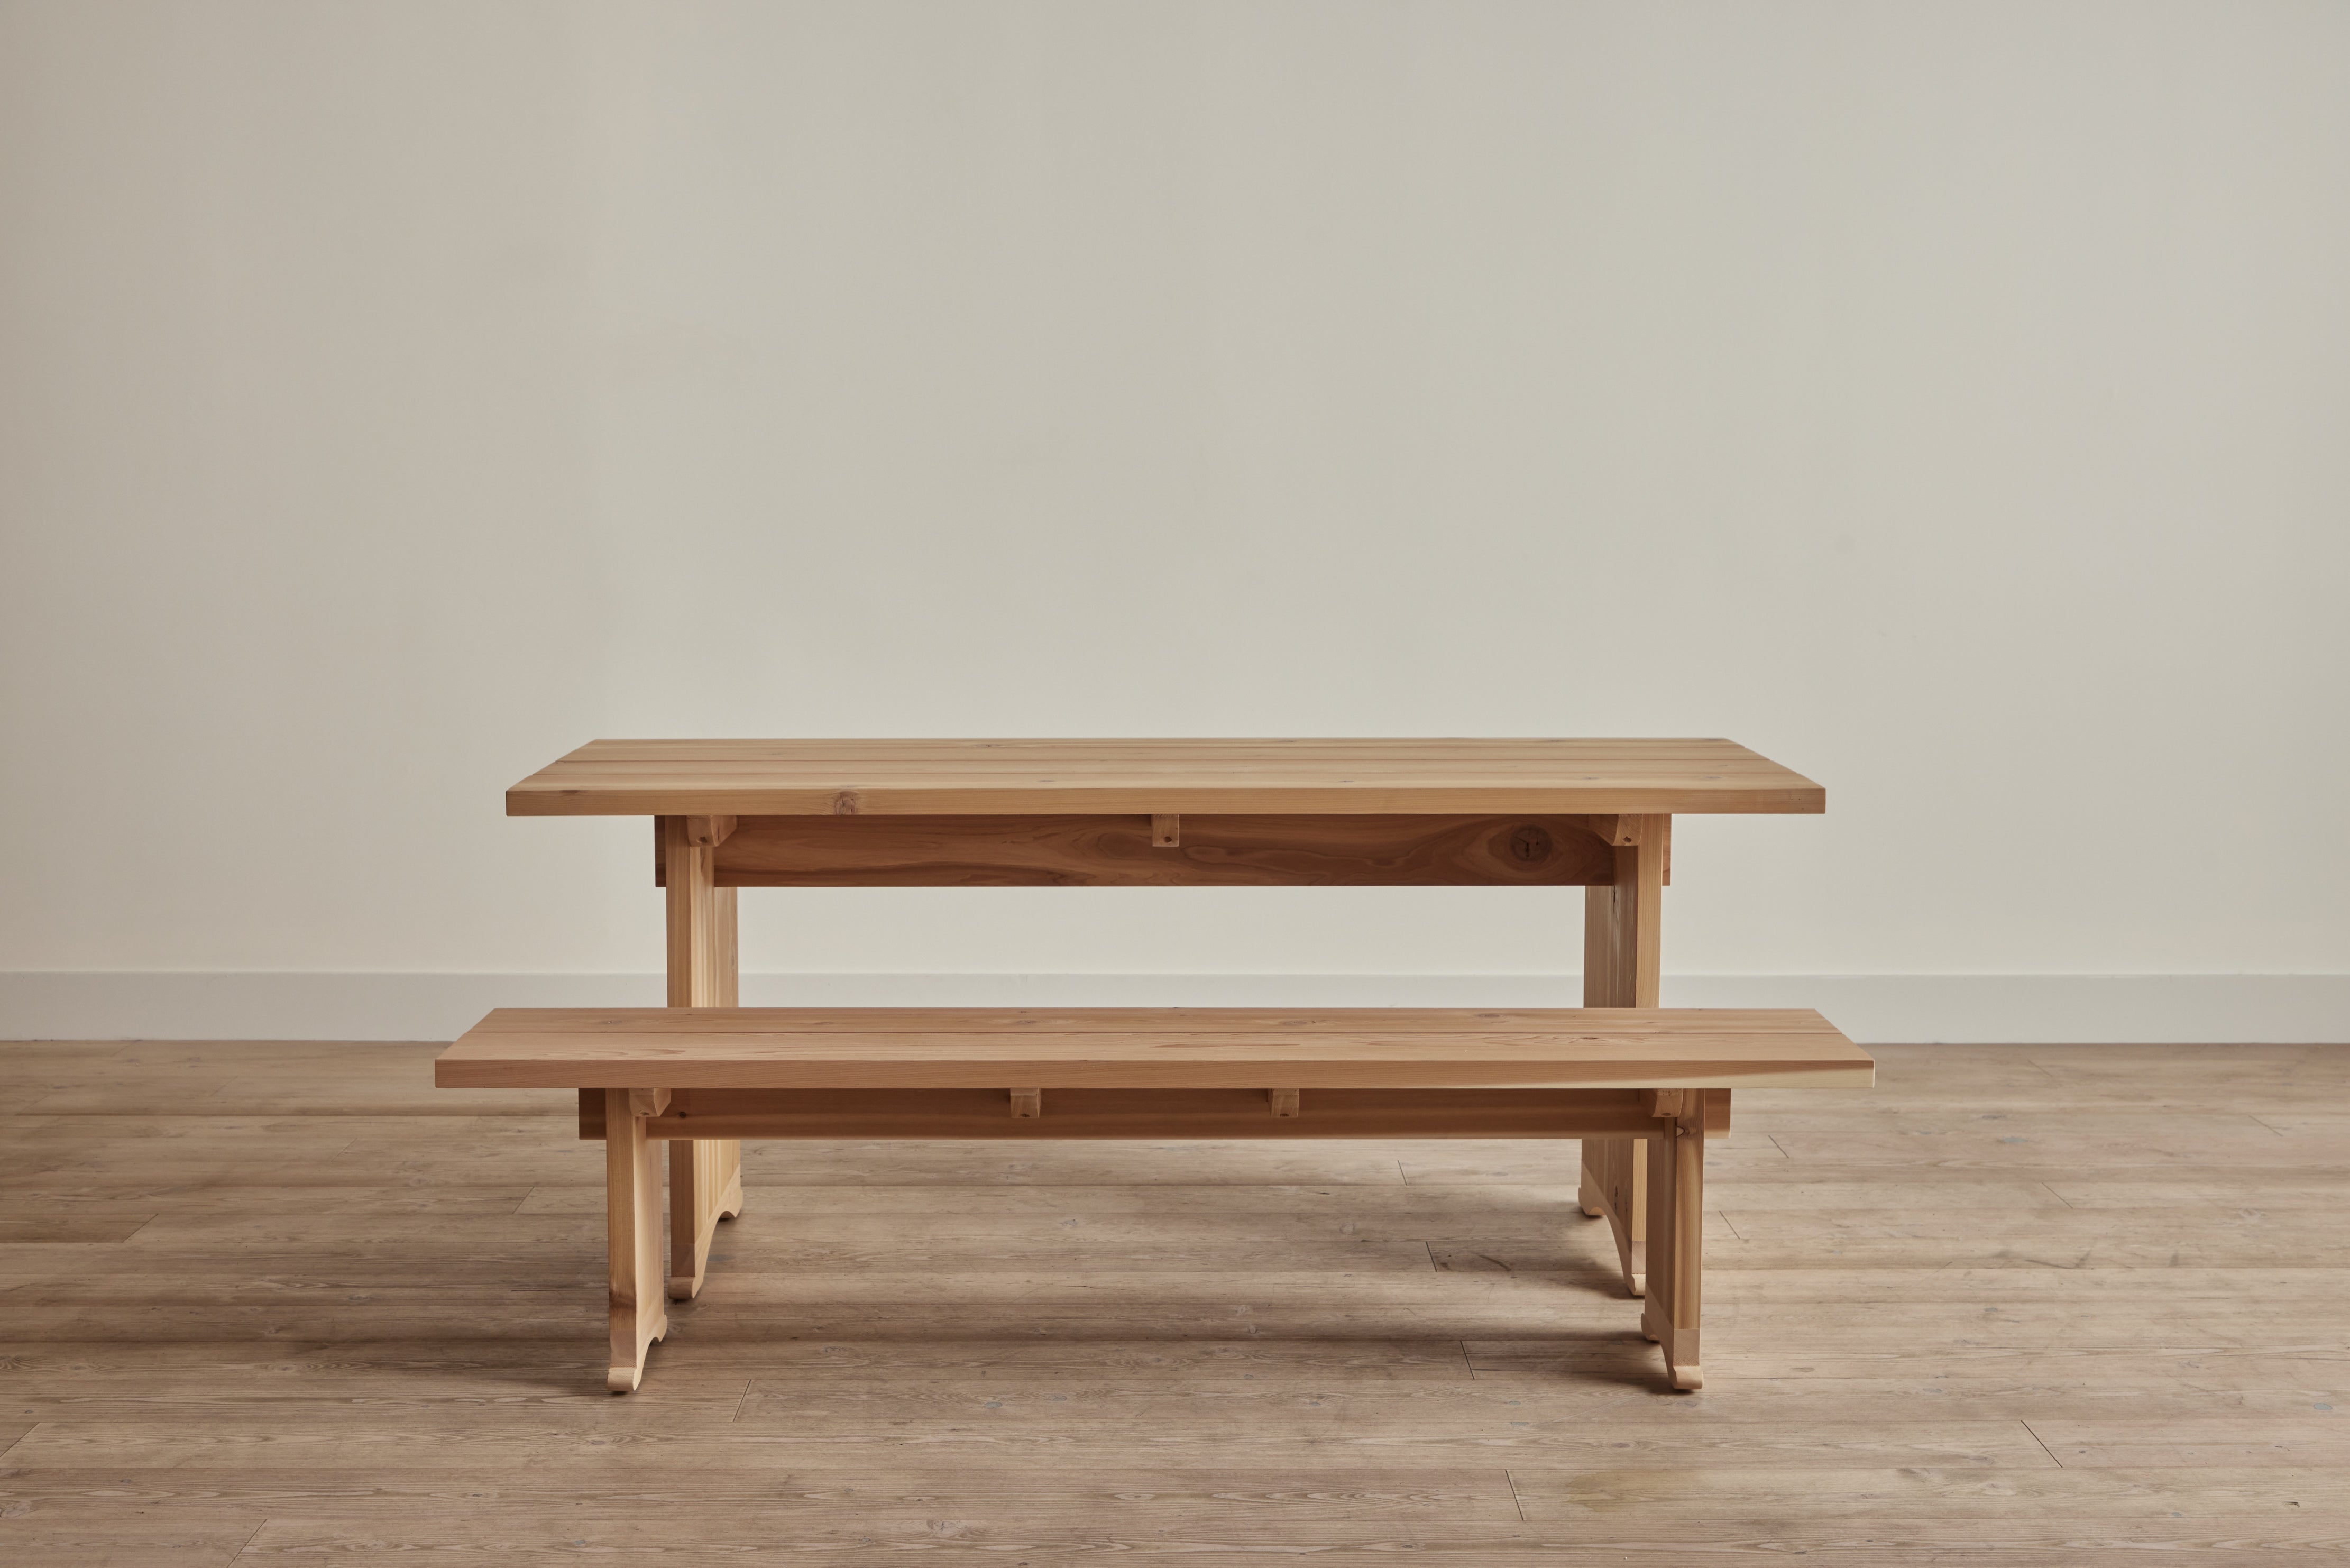 Nickey Kehoe Plank Picnic Table